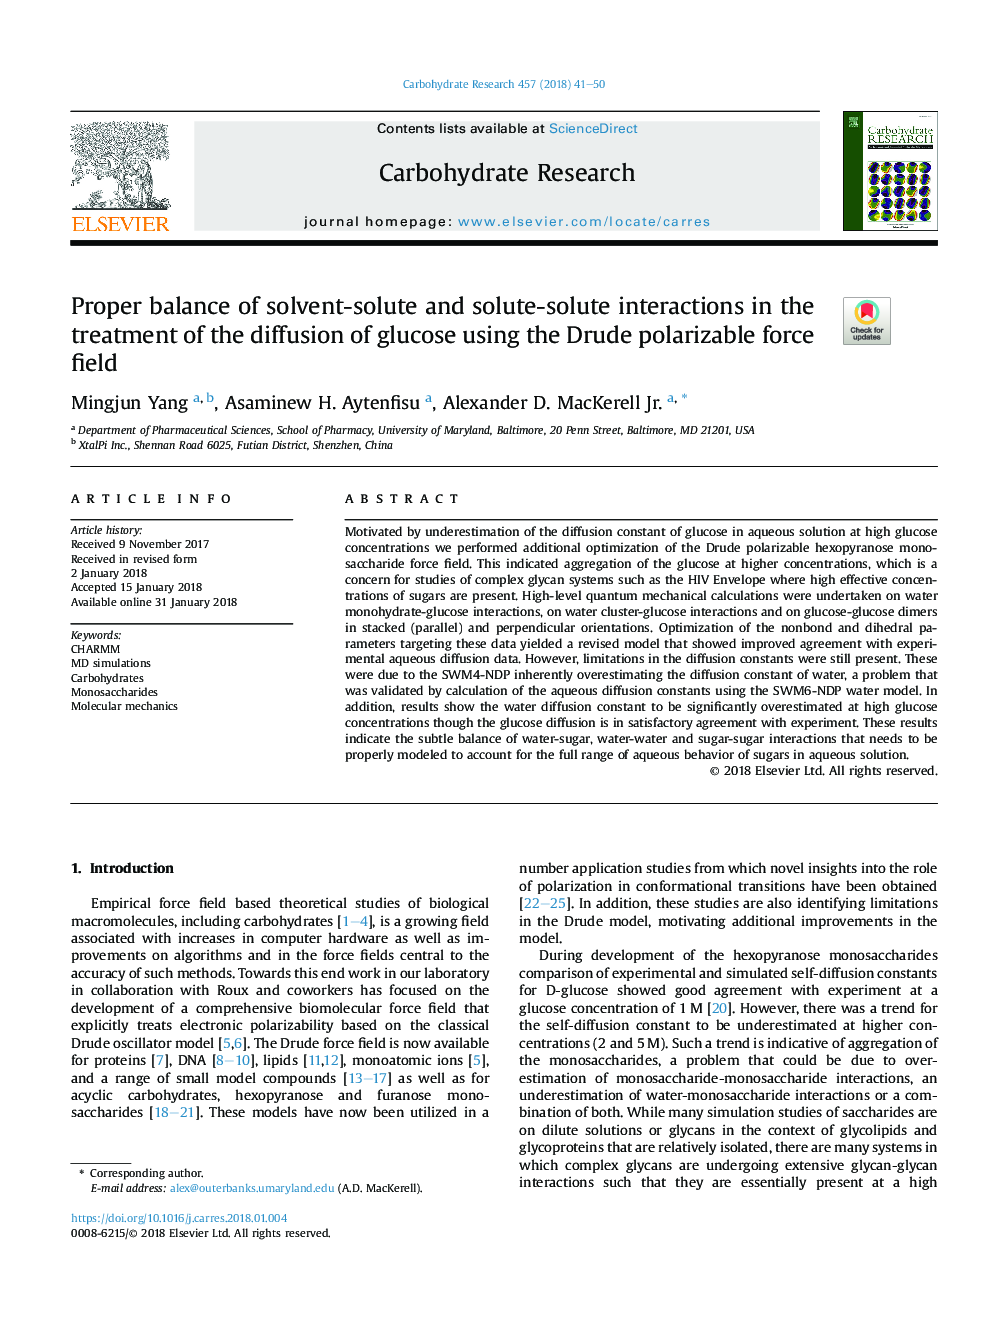 Proper balance of solvent-solute and solute-solute interactions in the treatment of the diffusion of glucose using the Drude polarizable force field